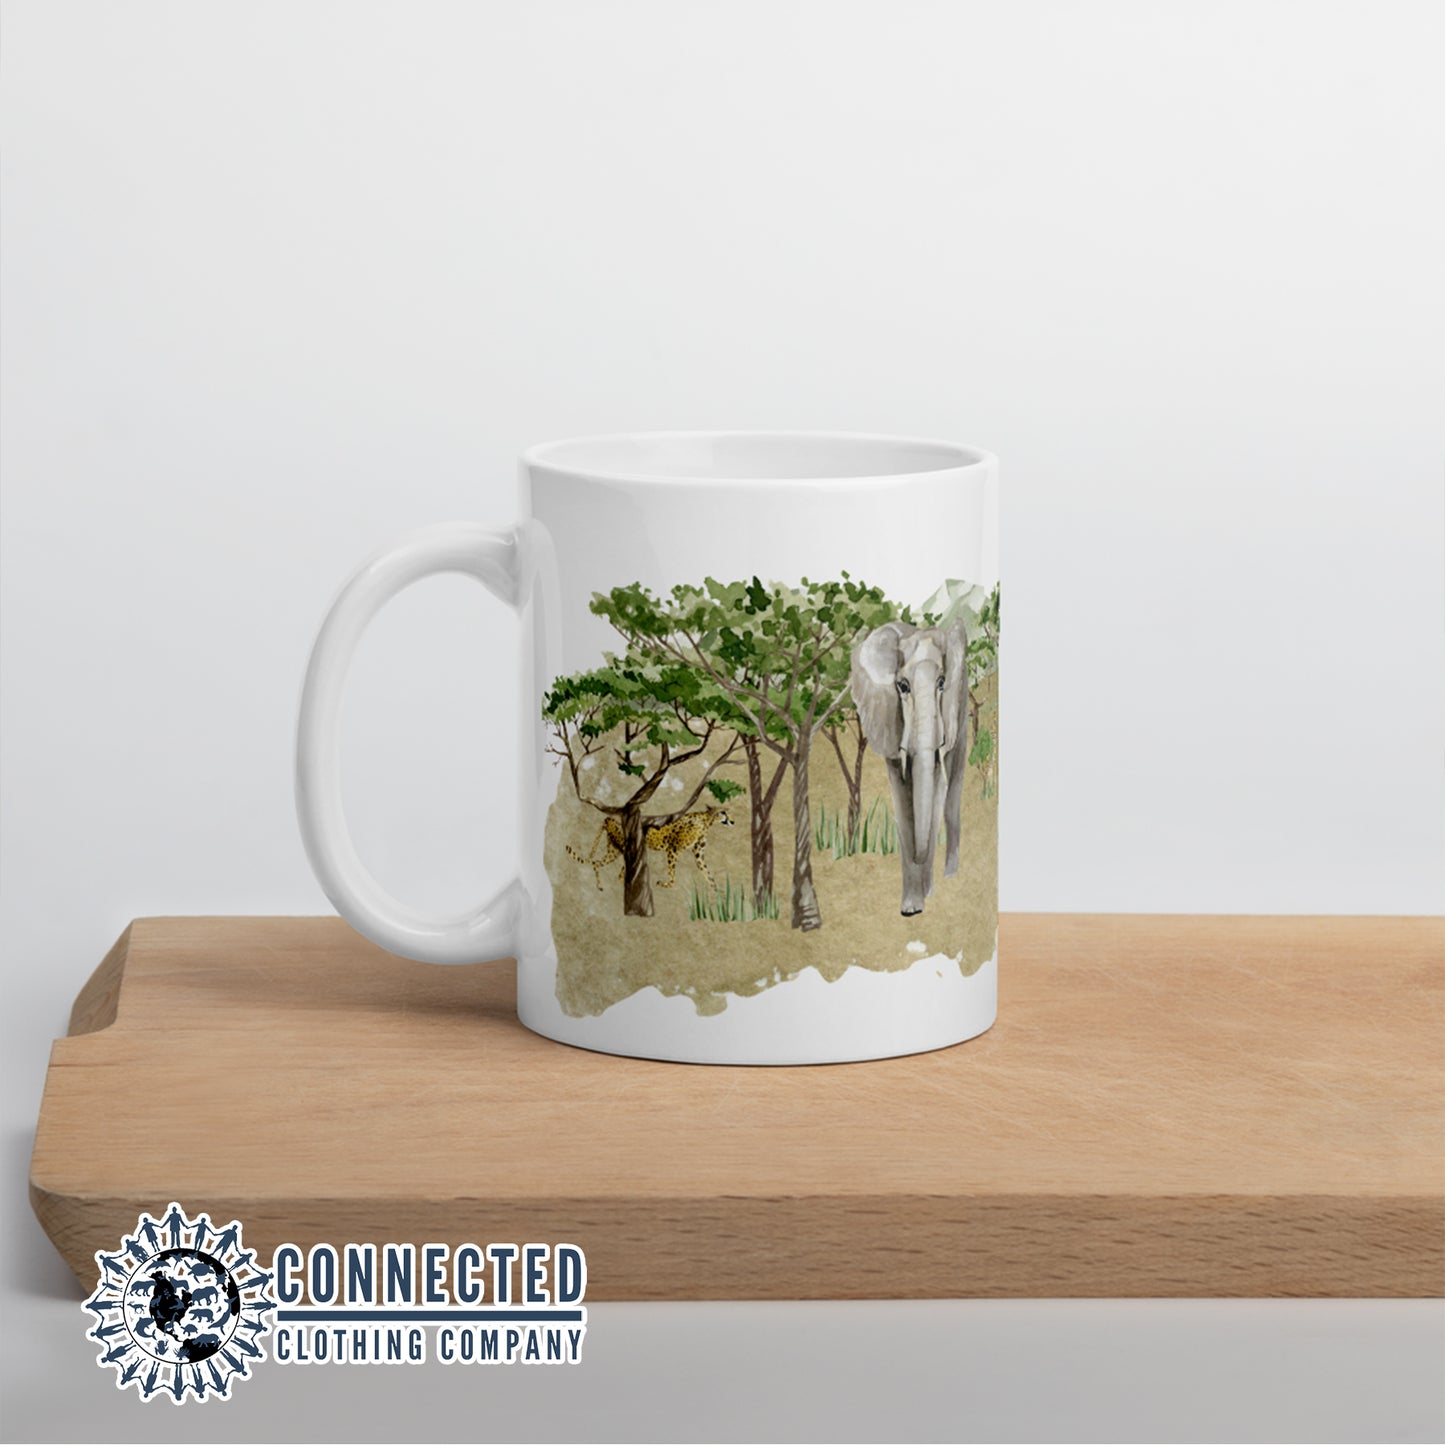 Keep Africa Wild Classic Mug - Connected Clothing Company - 10% of profits donated to the Giraffe Conservation Foundation